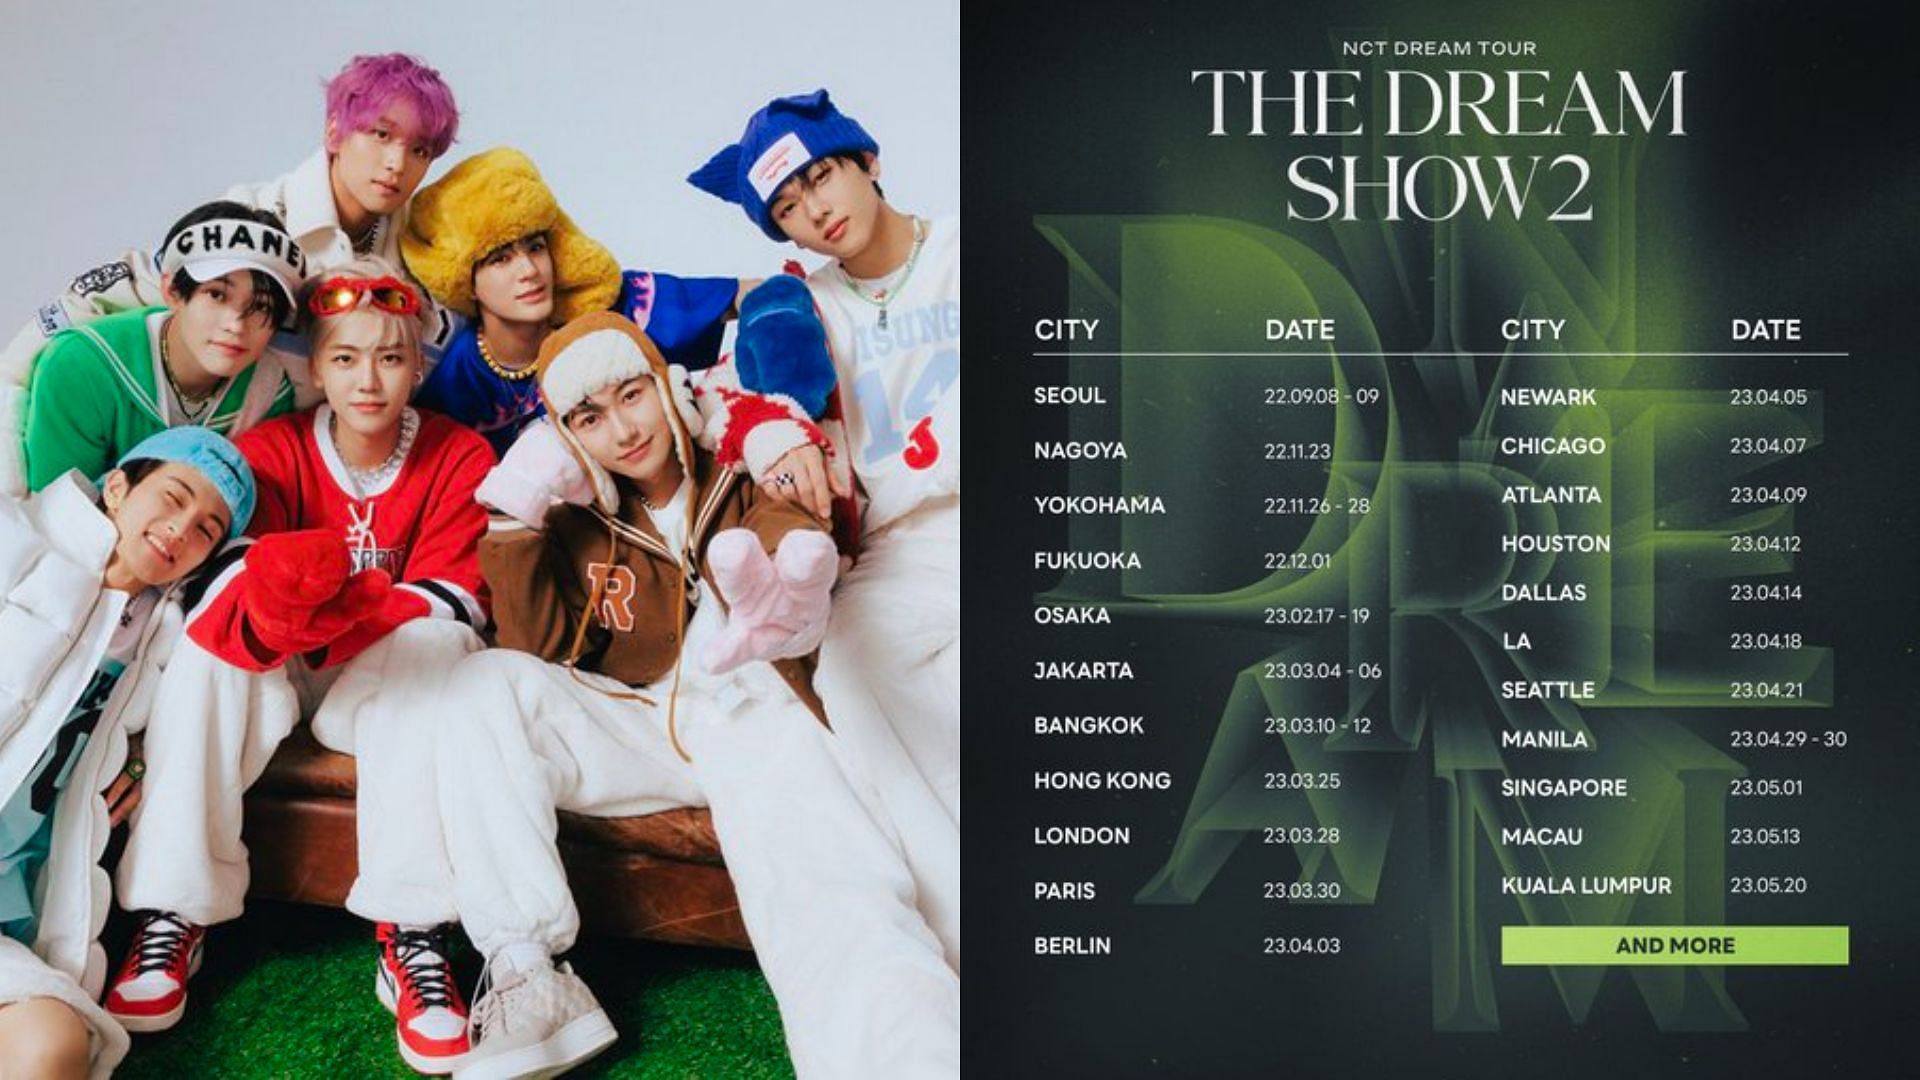 NCT Dream U.S., Europe, and Asia Tour Dates, cities, tickets, and more